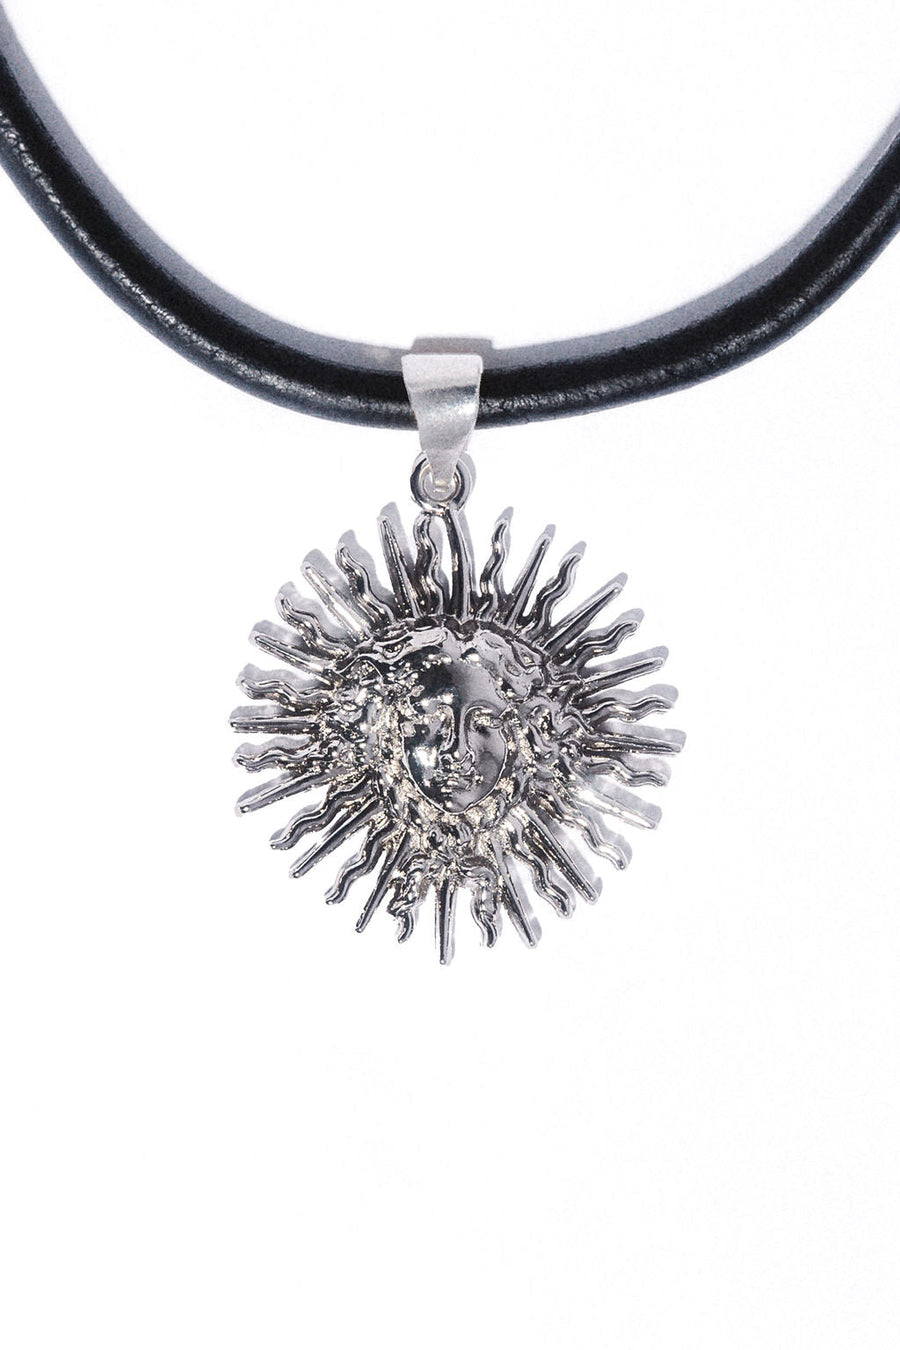 Om Imports Jewelry Silver Medusa Leather Necklace.:.Silver